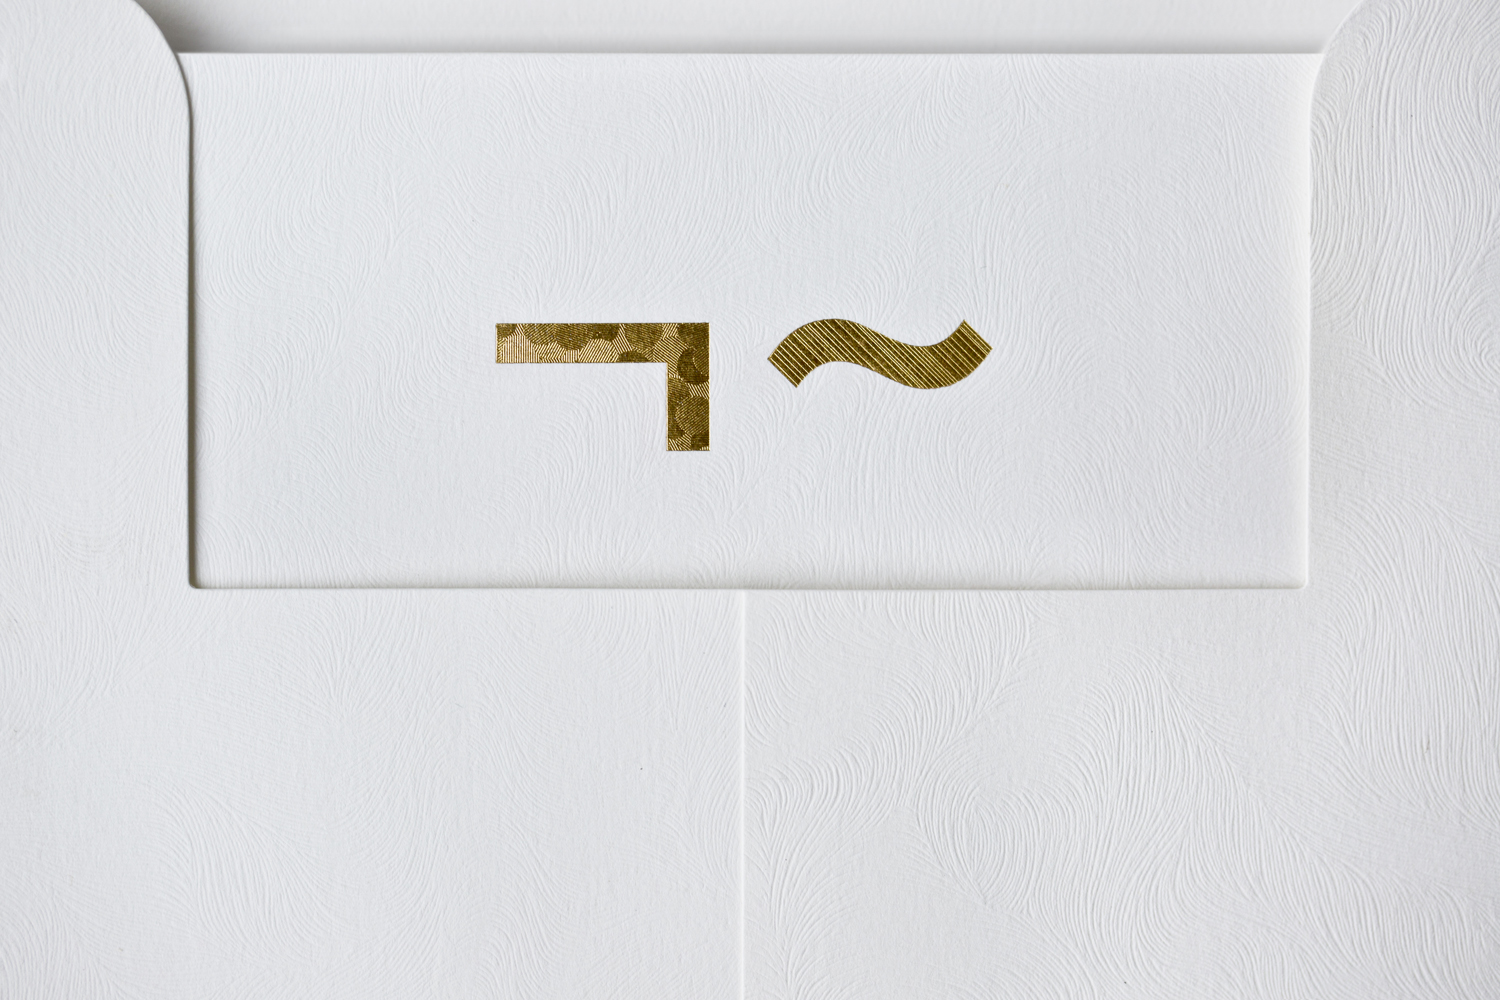 Logo and gold foiled envelope and headed paper for UK model agency Linden Staub by London-based graphic design studio Bibliothèque.